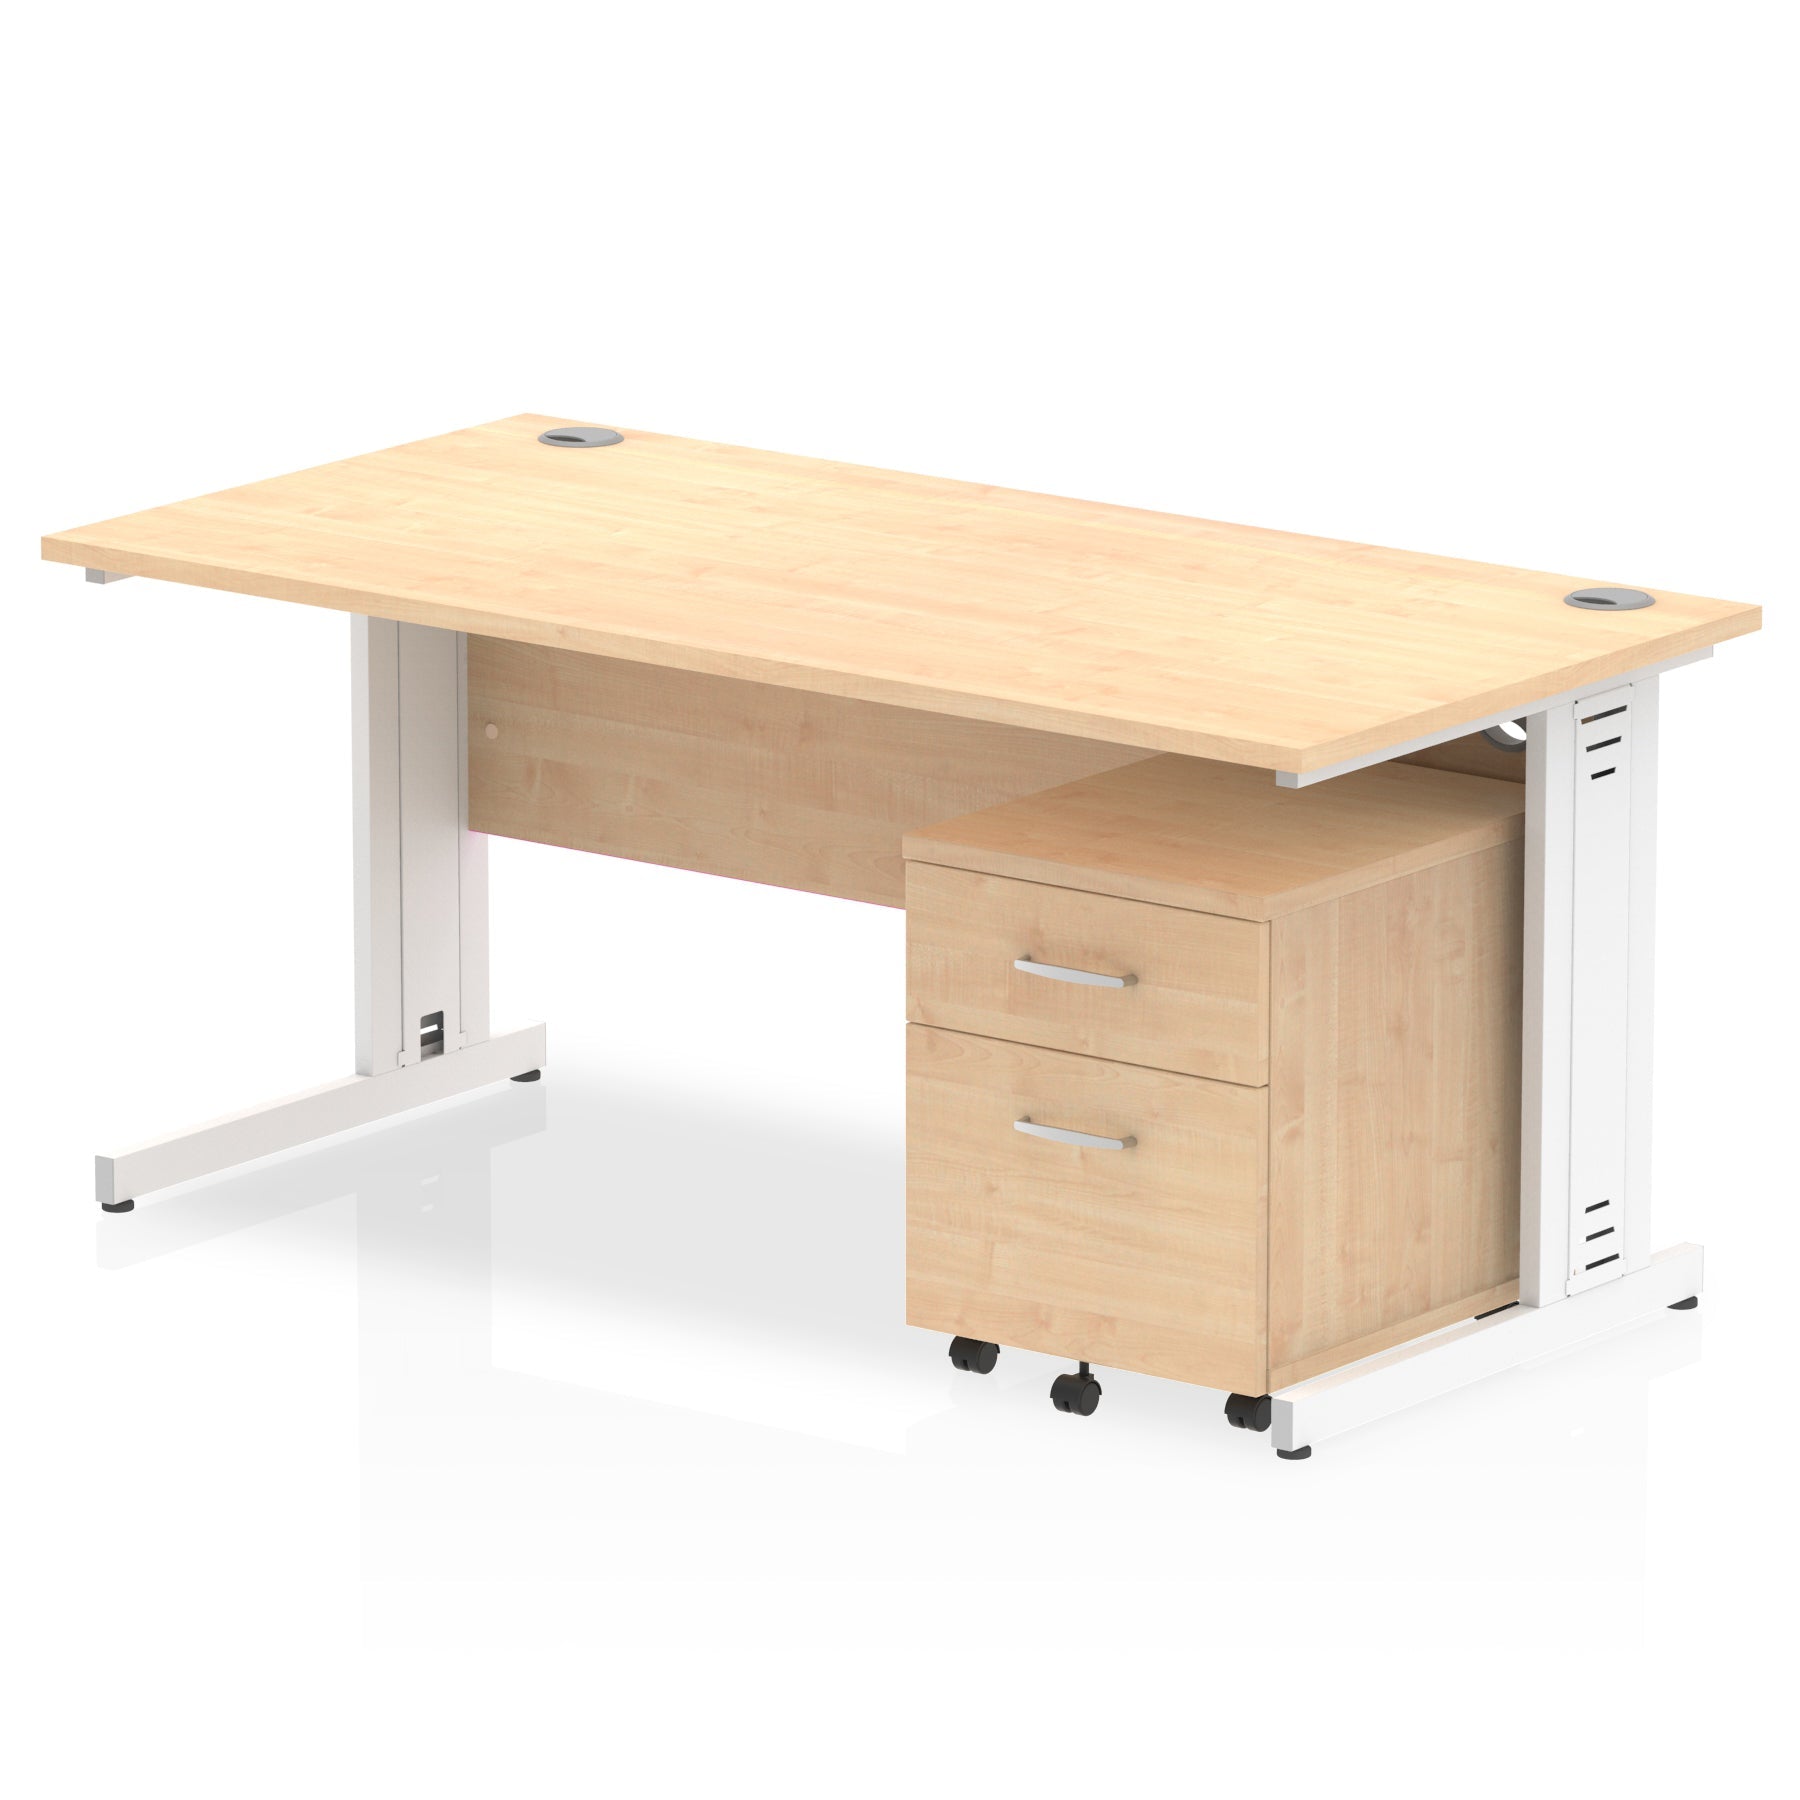 Impulse 1600mm Cable Managed Straight Desk w/ Mobile Pedestal - MFC Rectangular, Self-Assembly, 5-Year Guarantee, Lockable Drawers